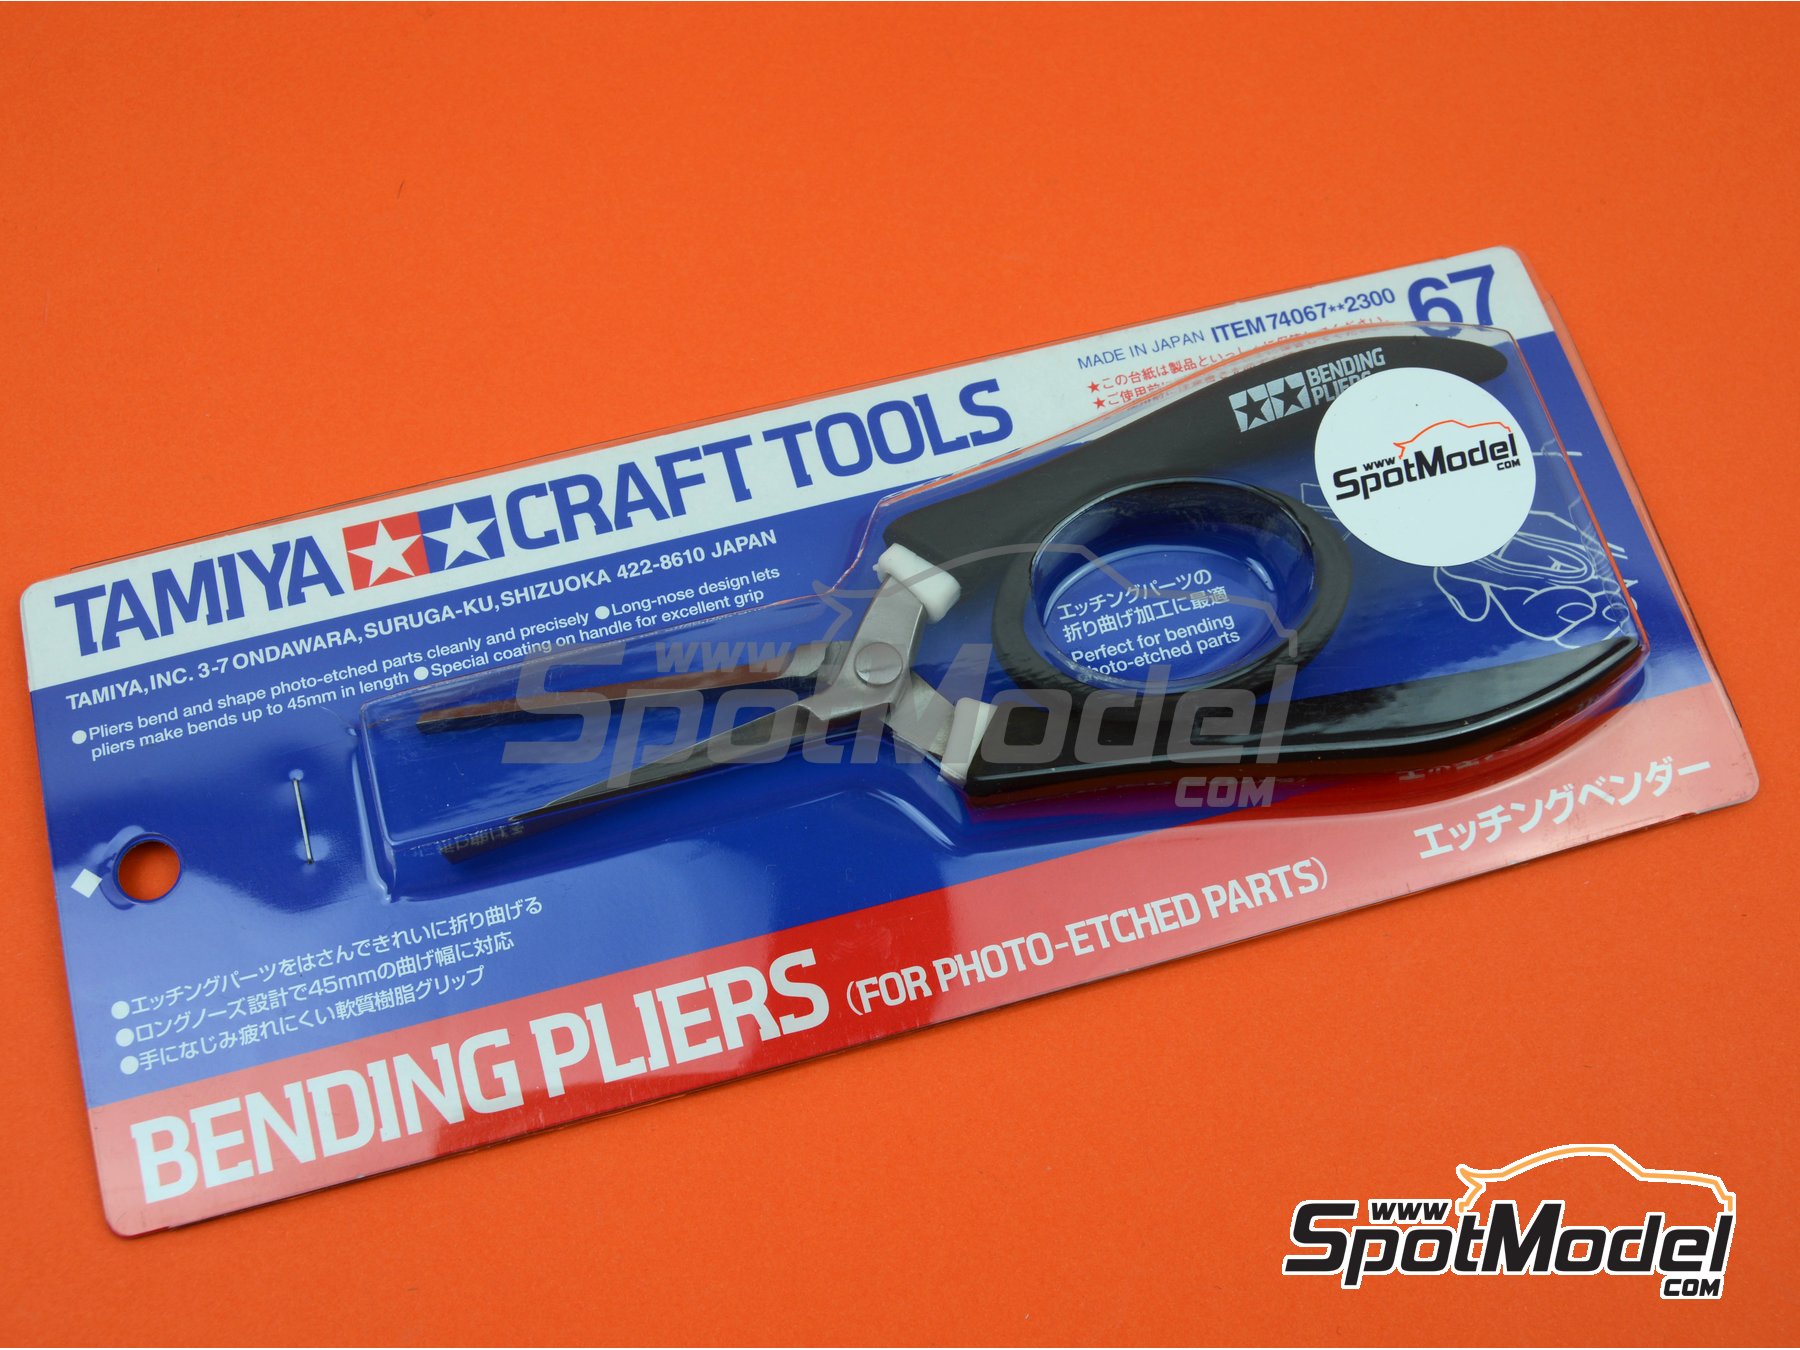 Tamiya 74067 Bending Pliers for Photo Etched Parts Tam74067 for sale online 